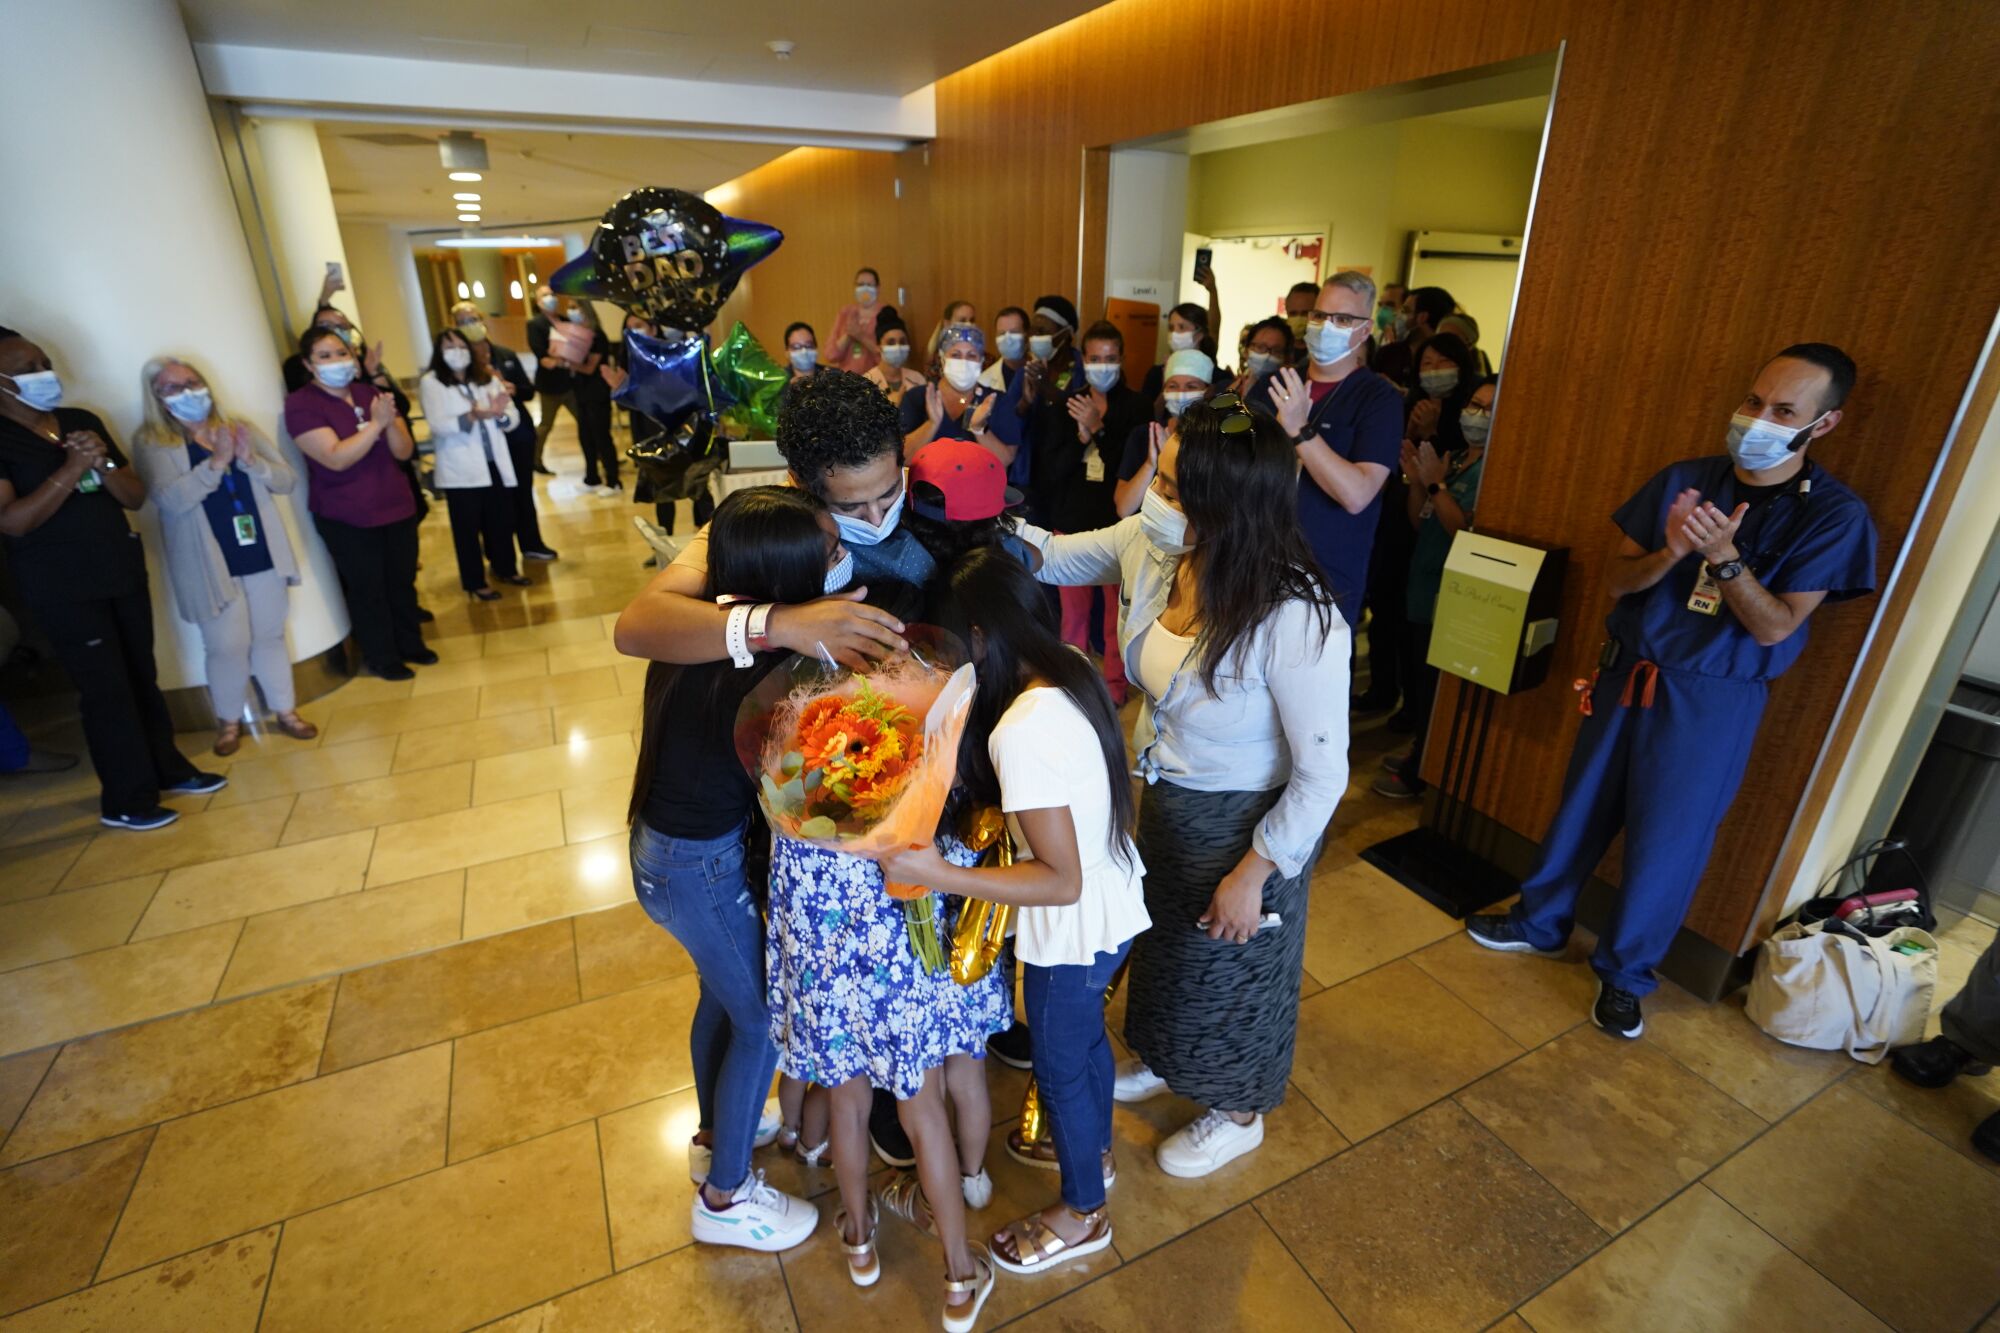 COVID-19 survivor Eli Centeno 37, greets his family as he's discharged from the hospital.